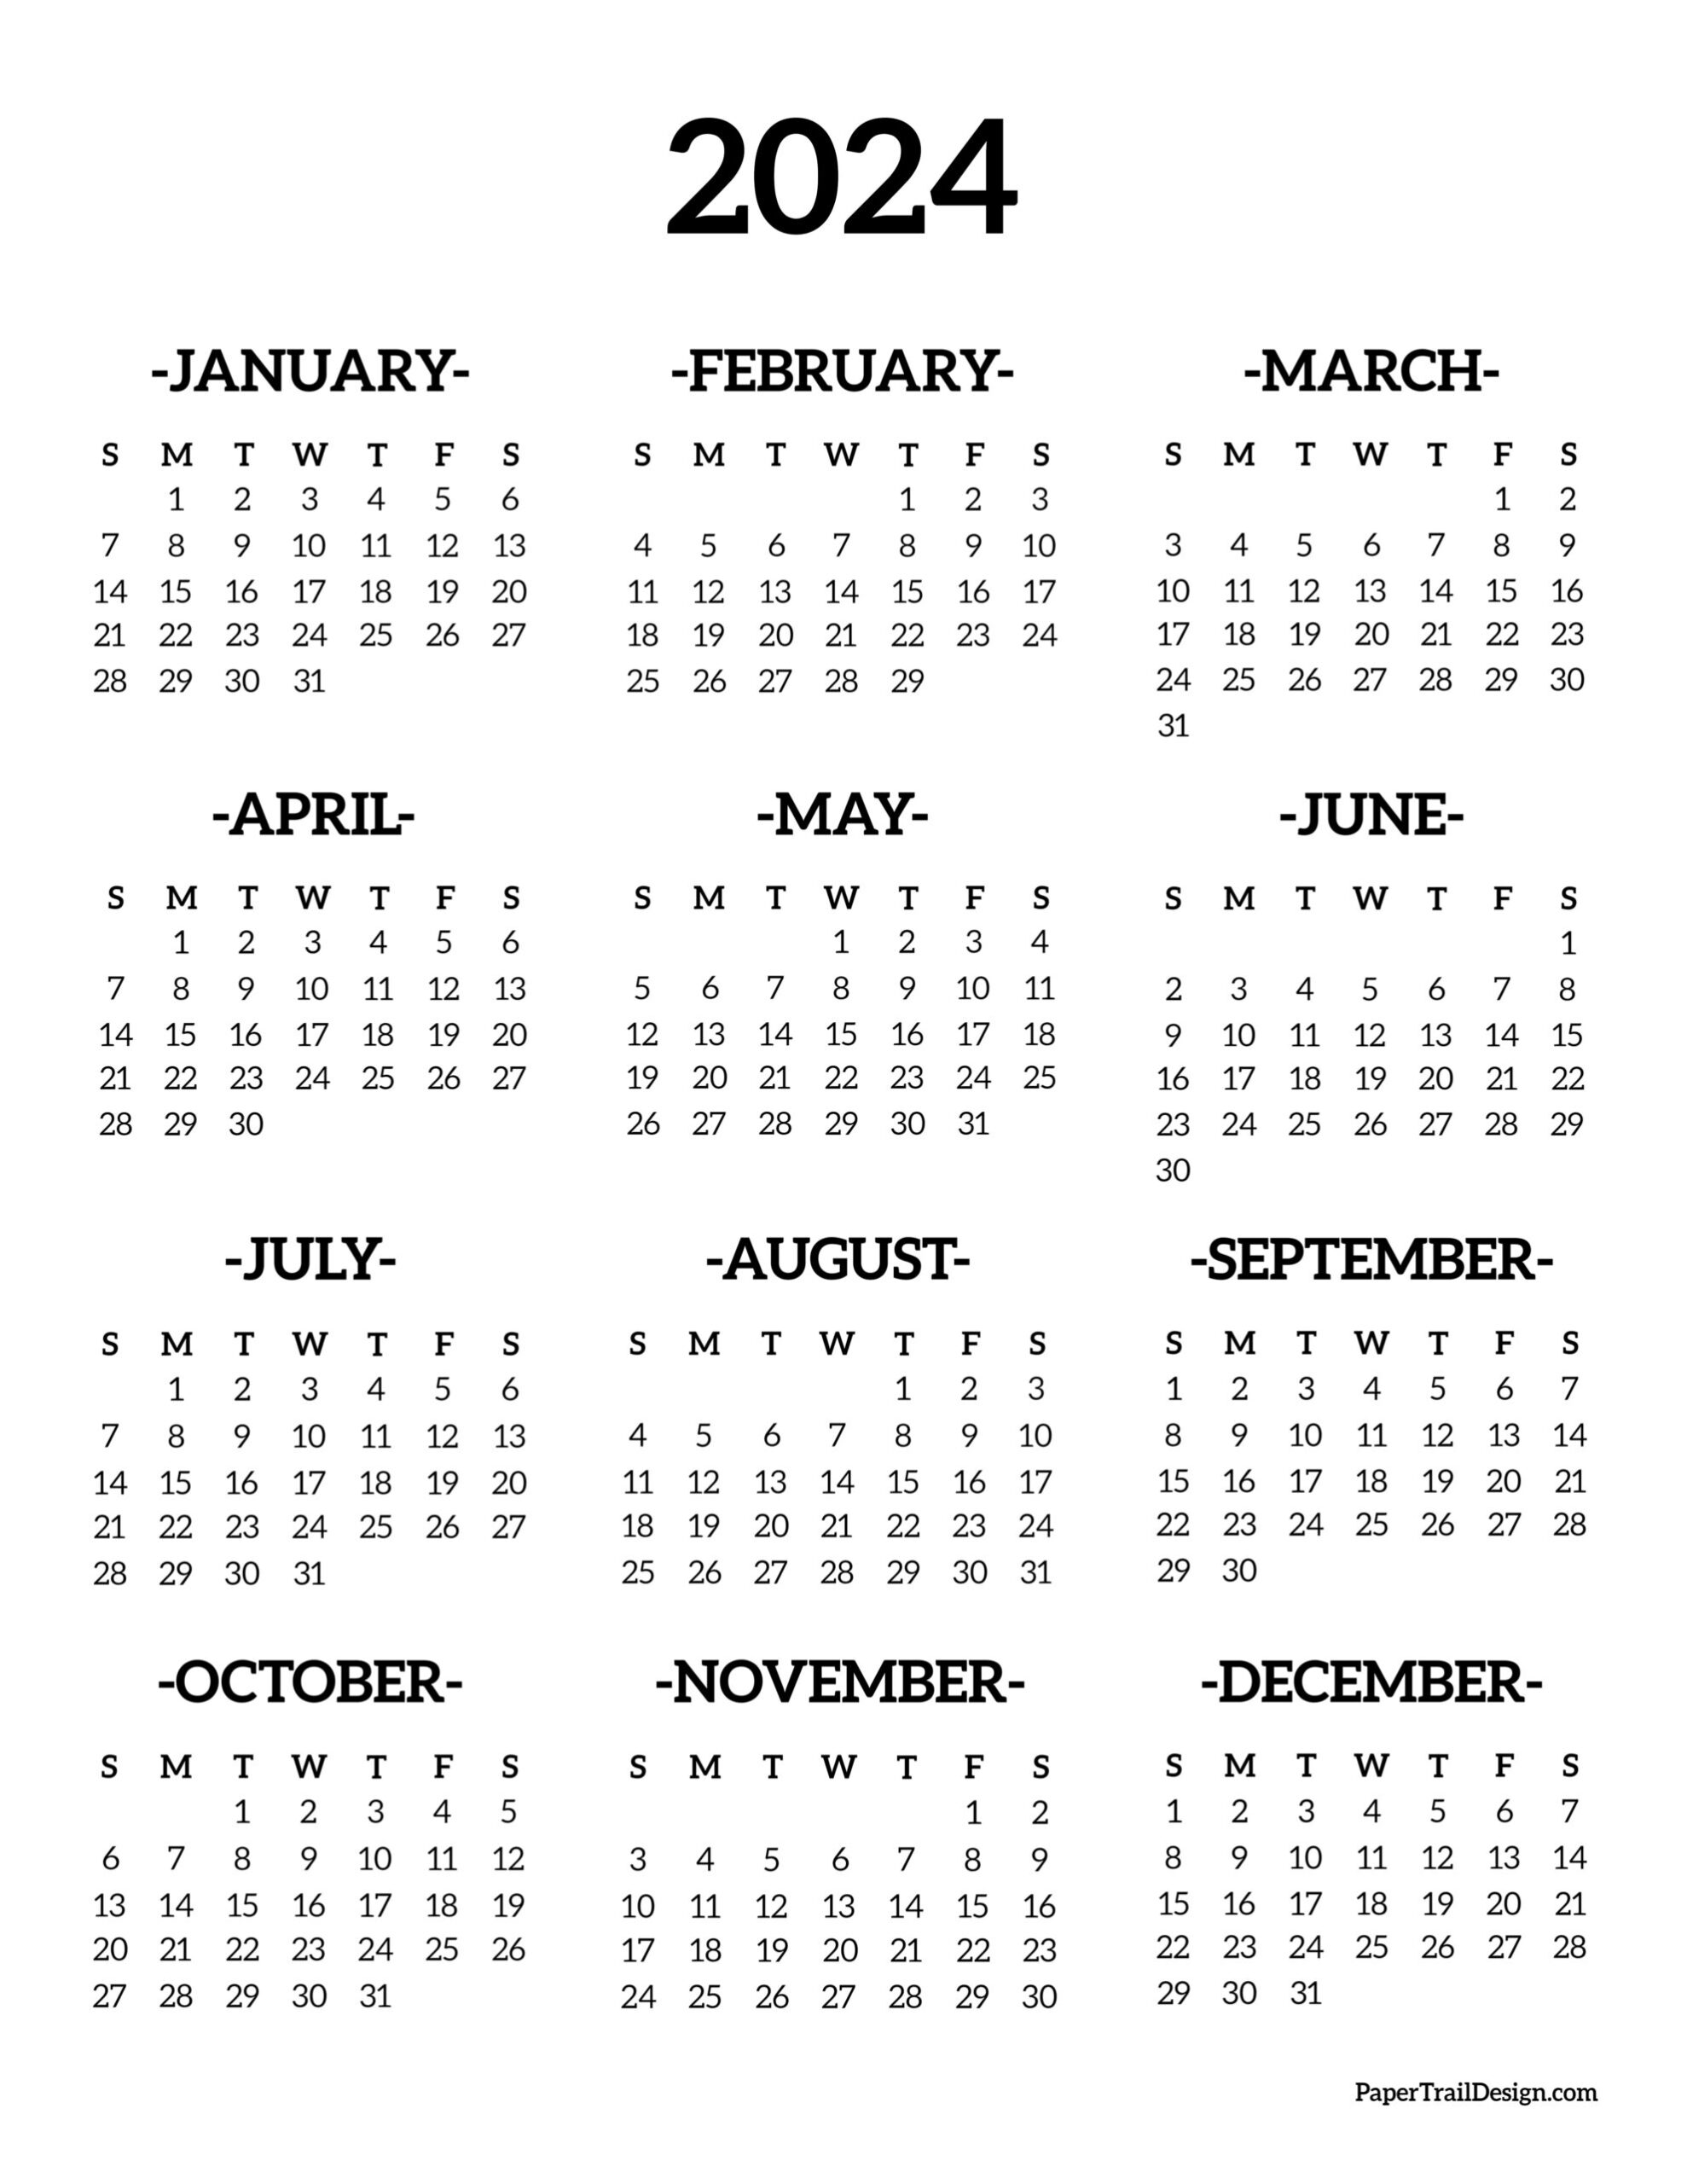 Calendar 2024 Printable One Page - Paper Trail Design for 2024 Year At A Glance Calendar Free Printable